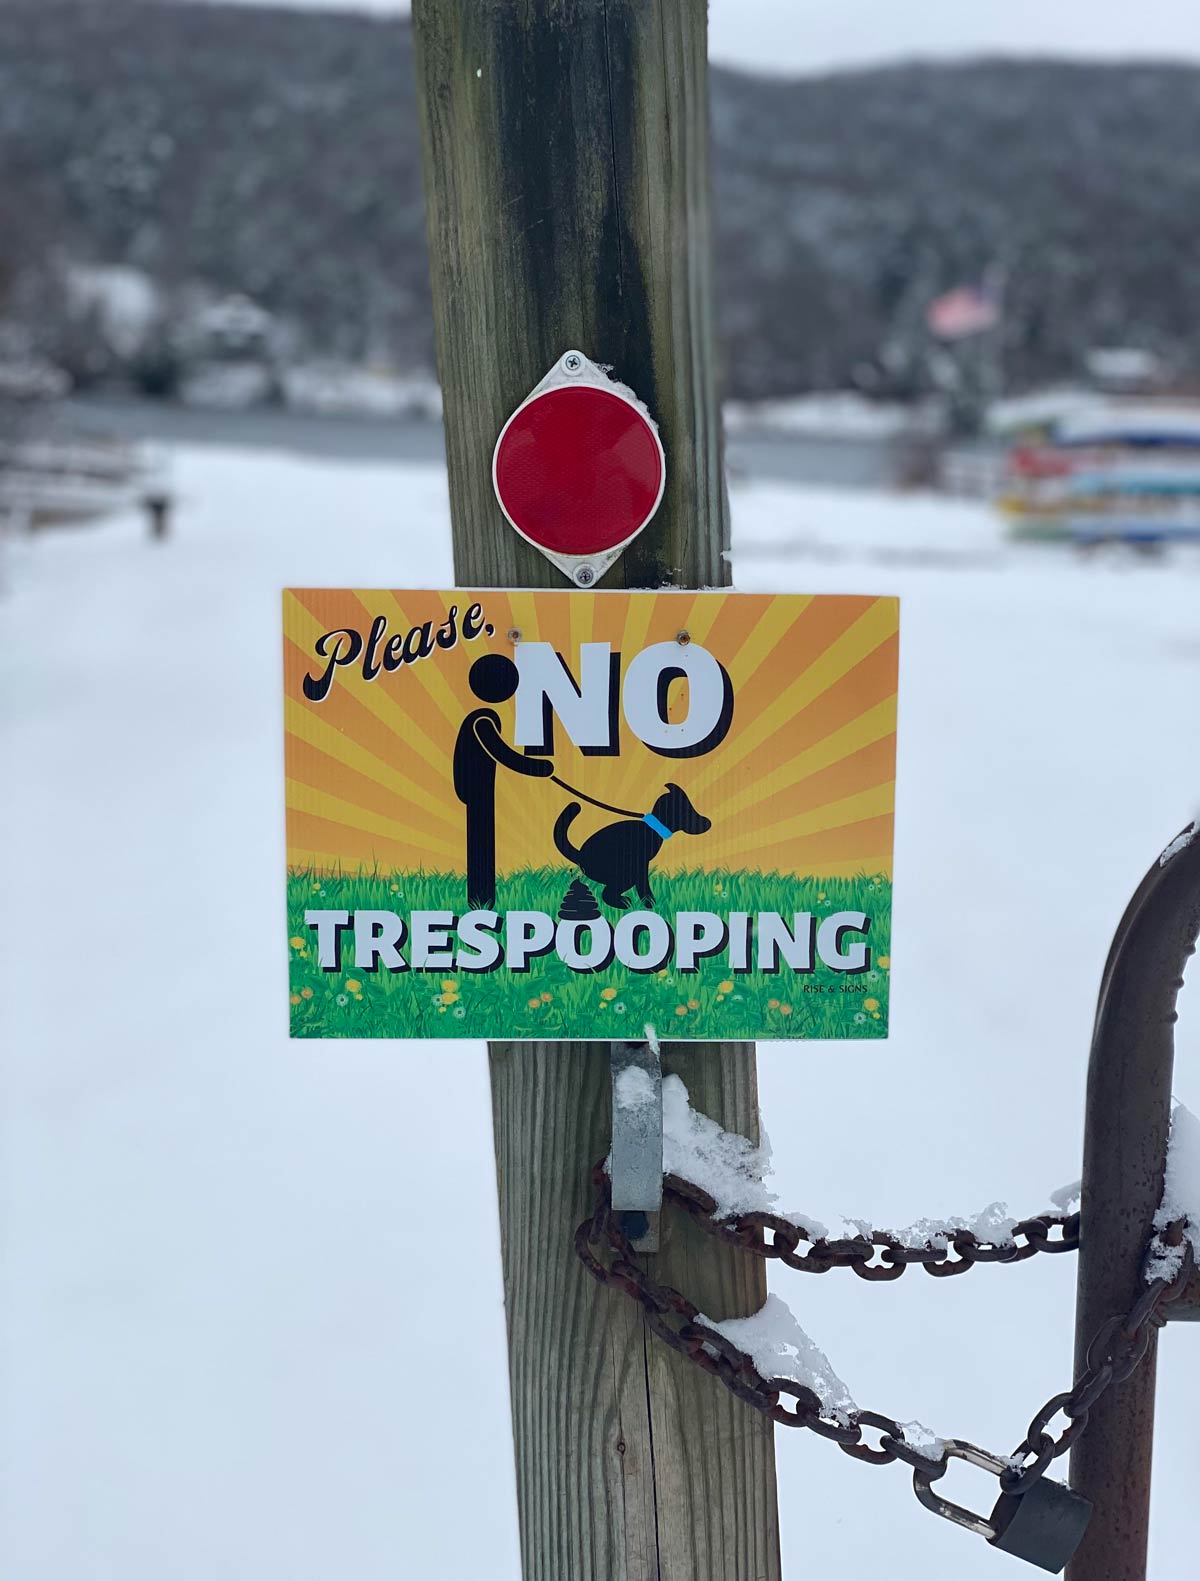 Learned a new word today. “Trespooping”